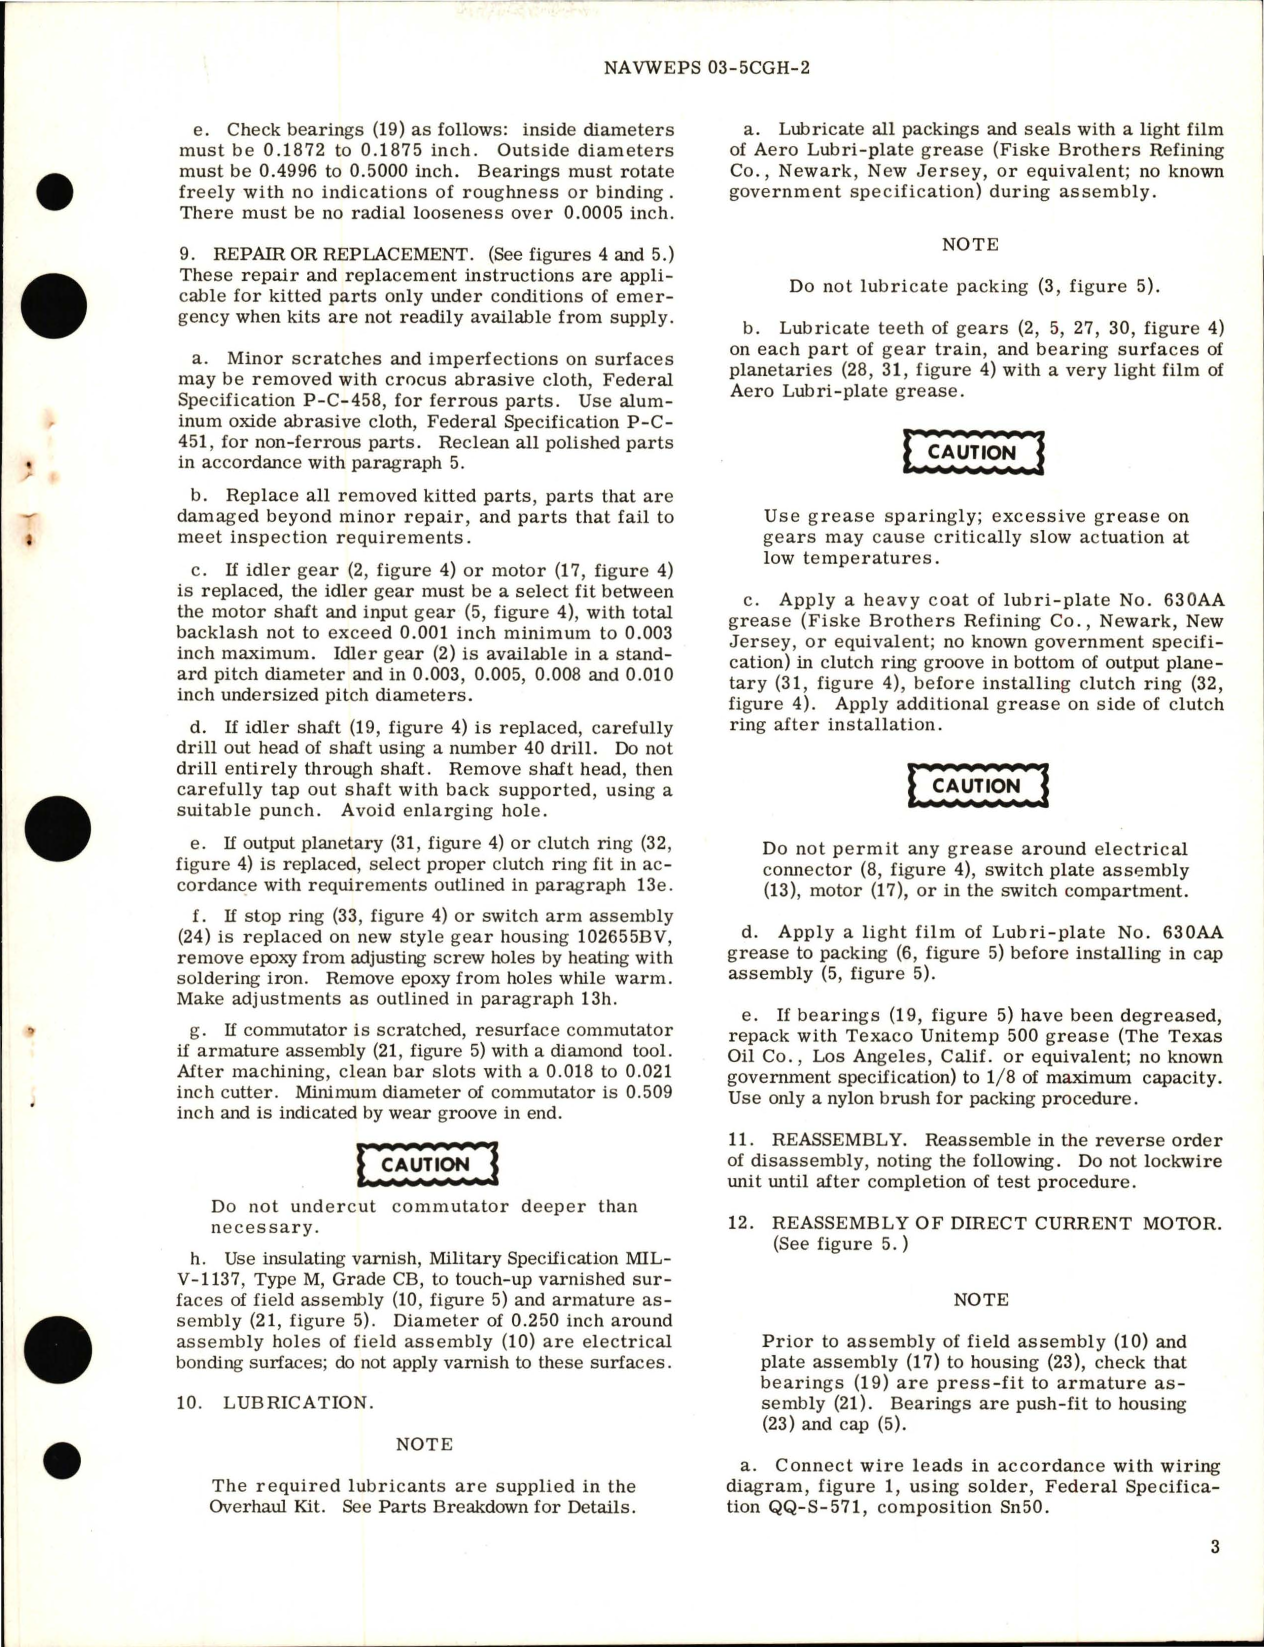 Sample page 5 from AirCorps Library document: Overhaul Instructions with Parts Breakdown for Actuator Assembly - Part MA11A1024B 